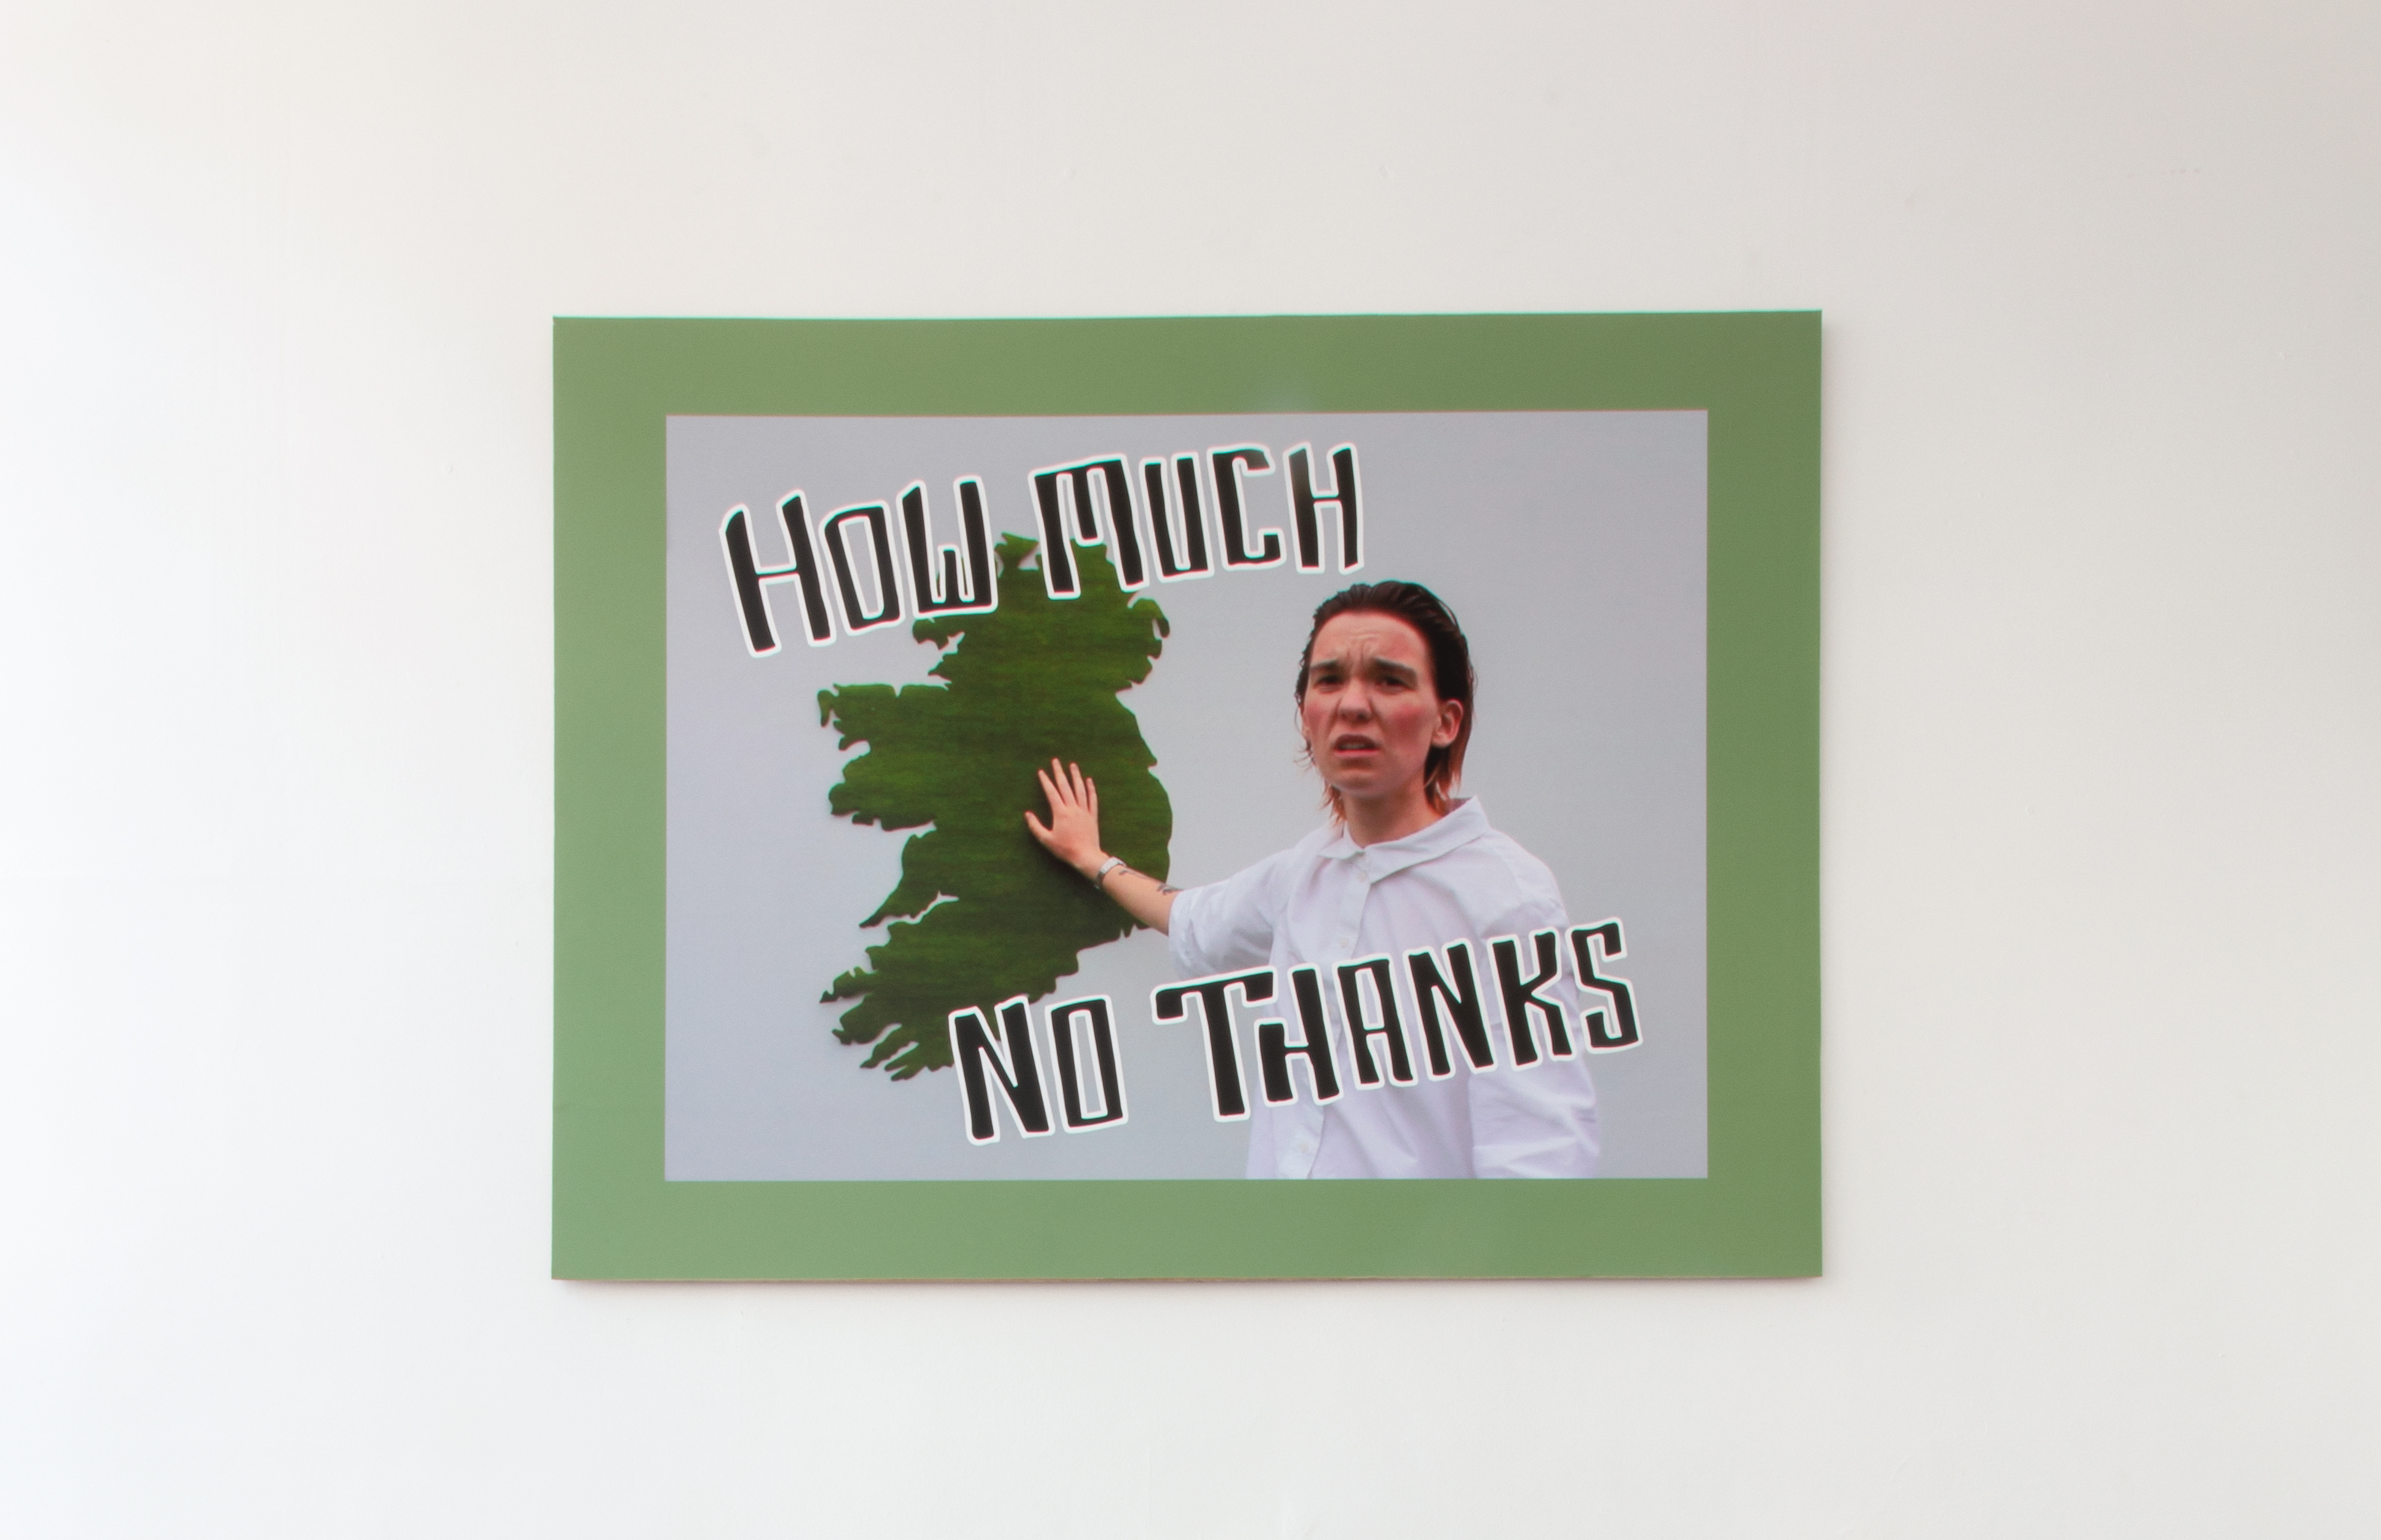 Eimear Walshe
'How Much, No Thanks', 
2020, Archival Pigment Print on Hahnemuhle Photo Rag on MDF, 150 x 210cm 

Image on loan from IMMA Collection
